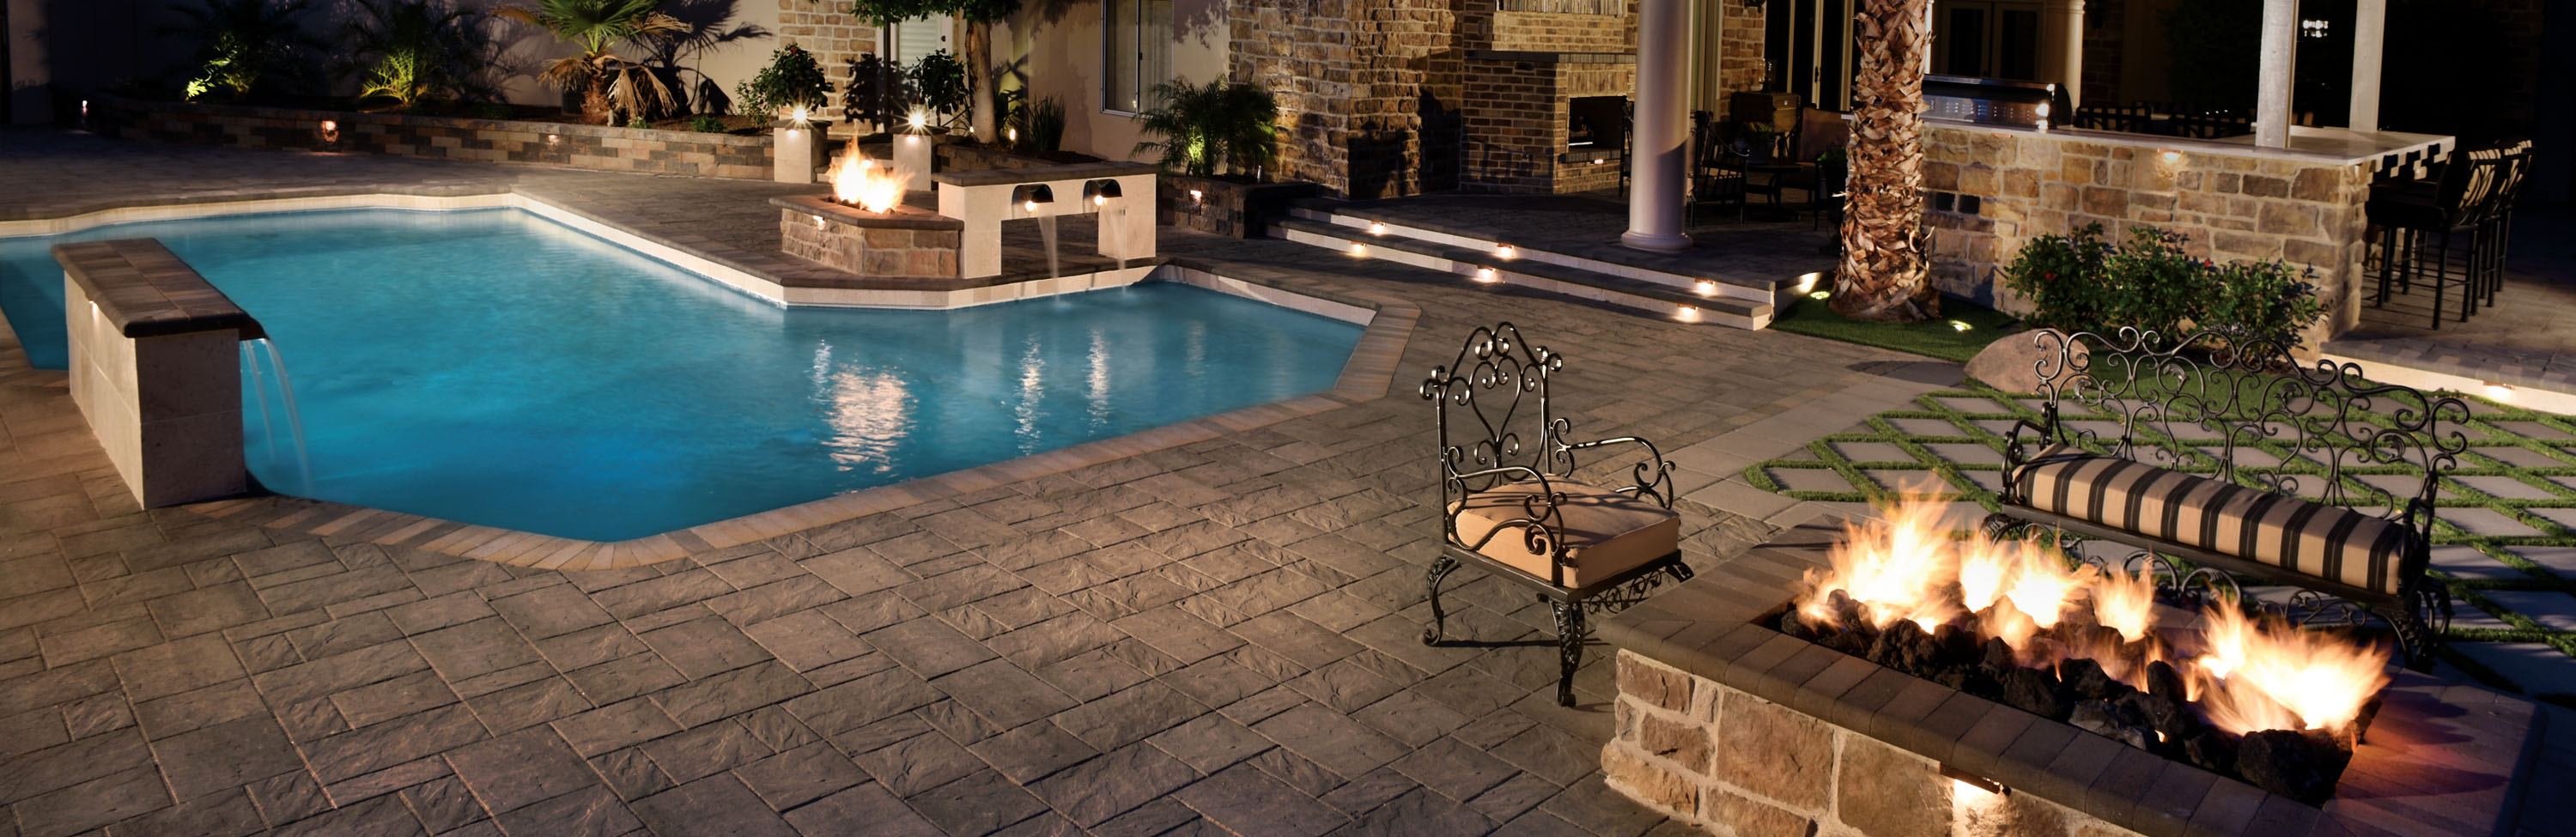 Aztec Stone and coping in slate color at poolside in night photograph